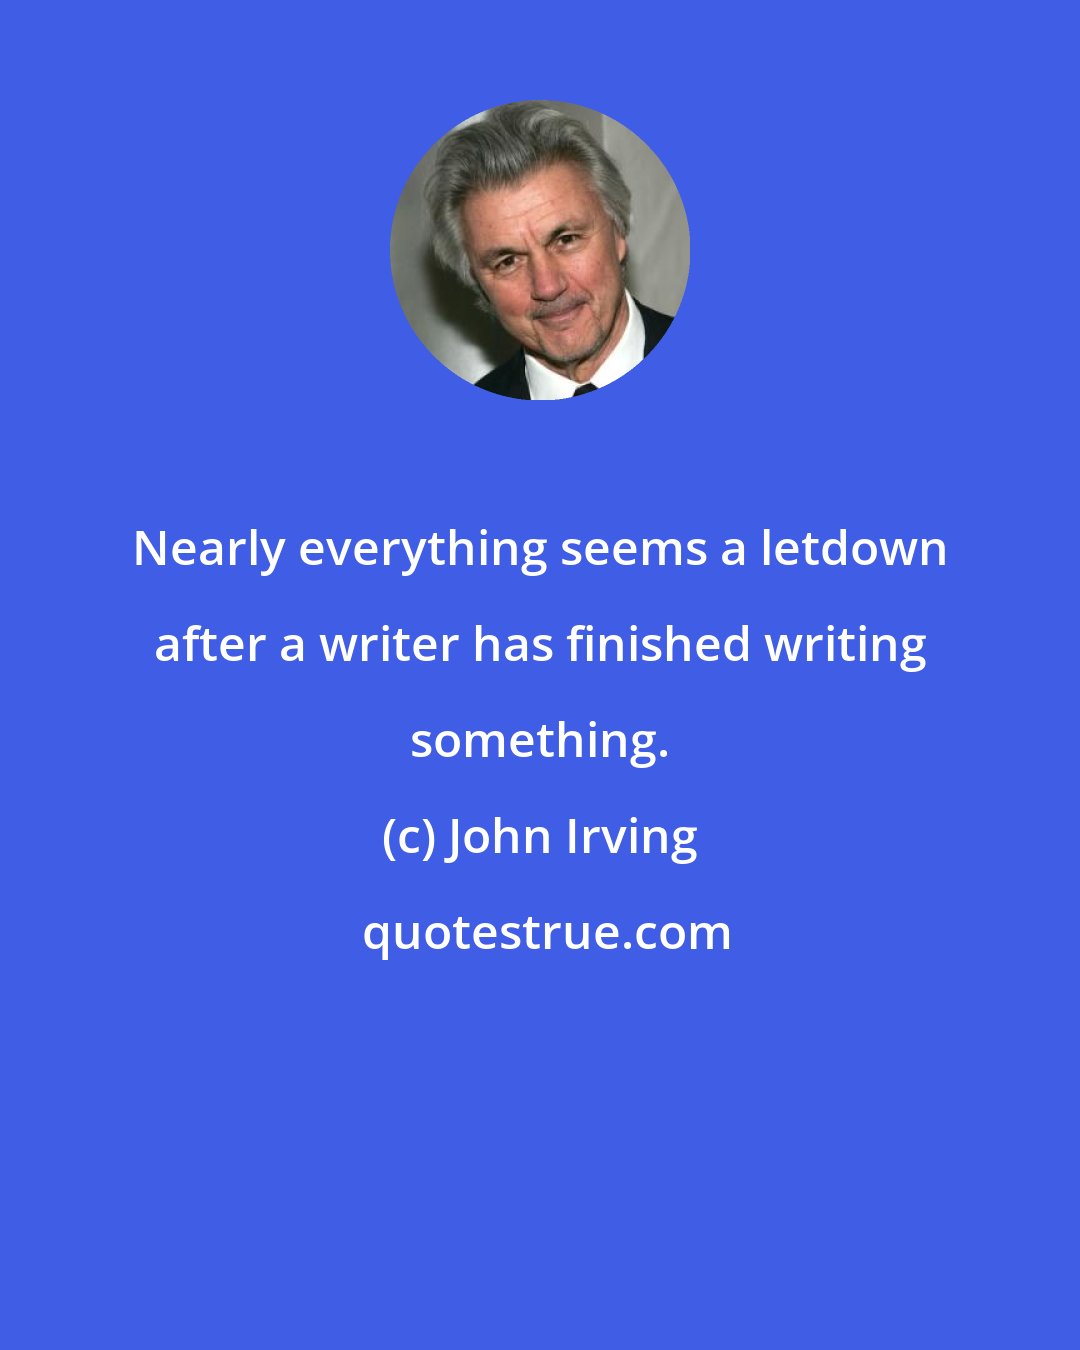 John Irving: Nearly everything seems a letdown after a writer has finished writing something.